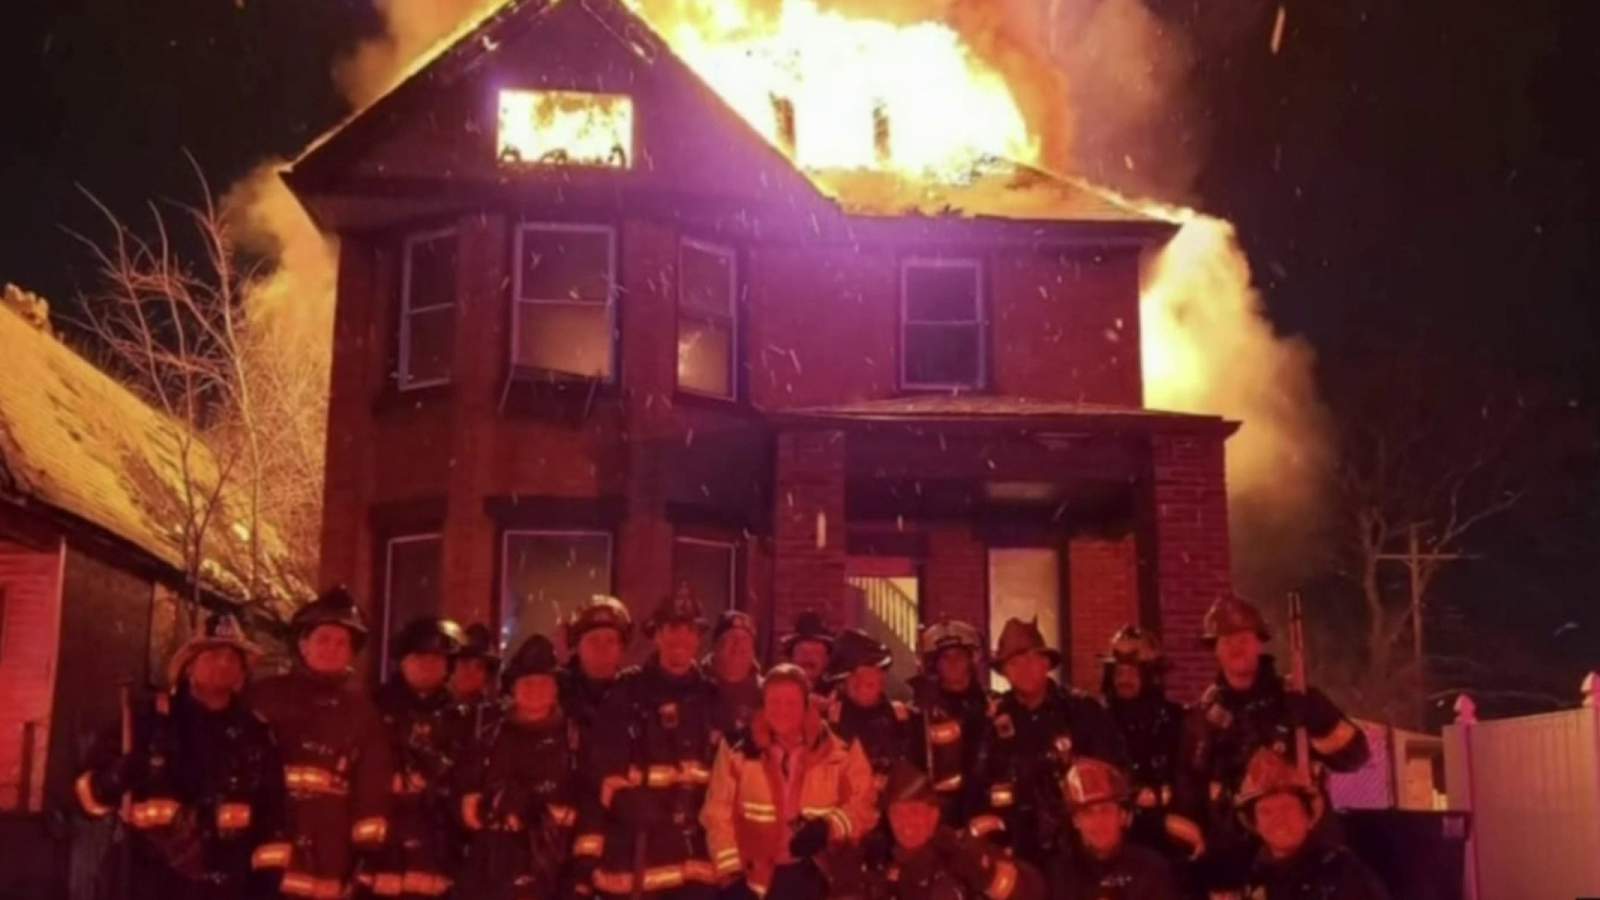 Detroit resident wants firefighters who stopped to snap photo in front of his burning home fired